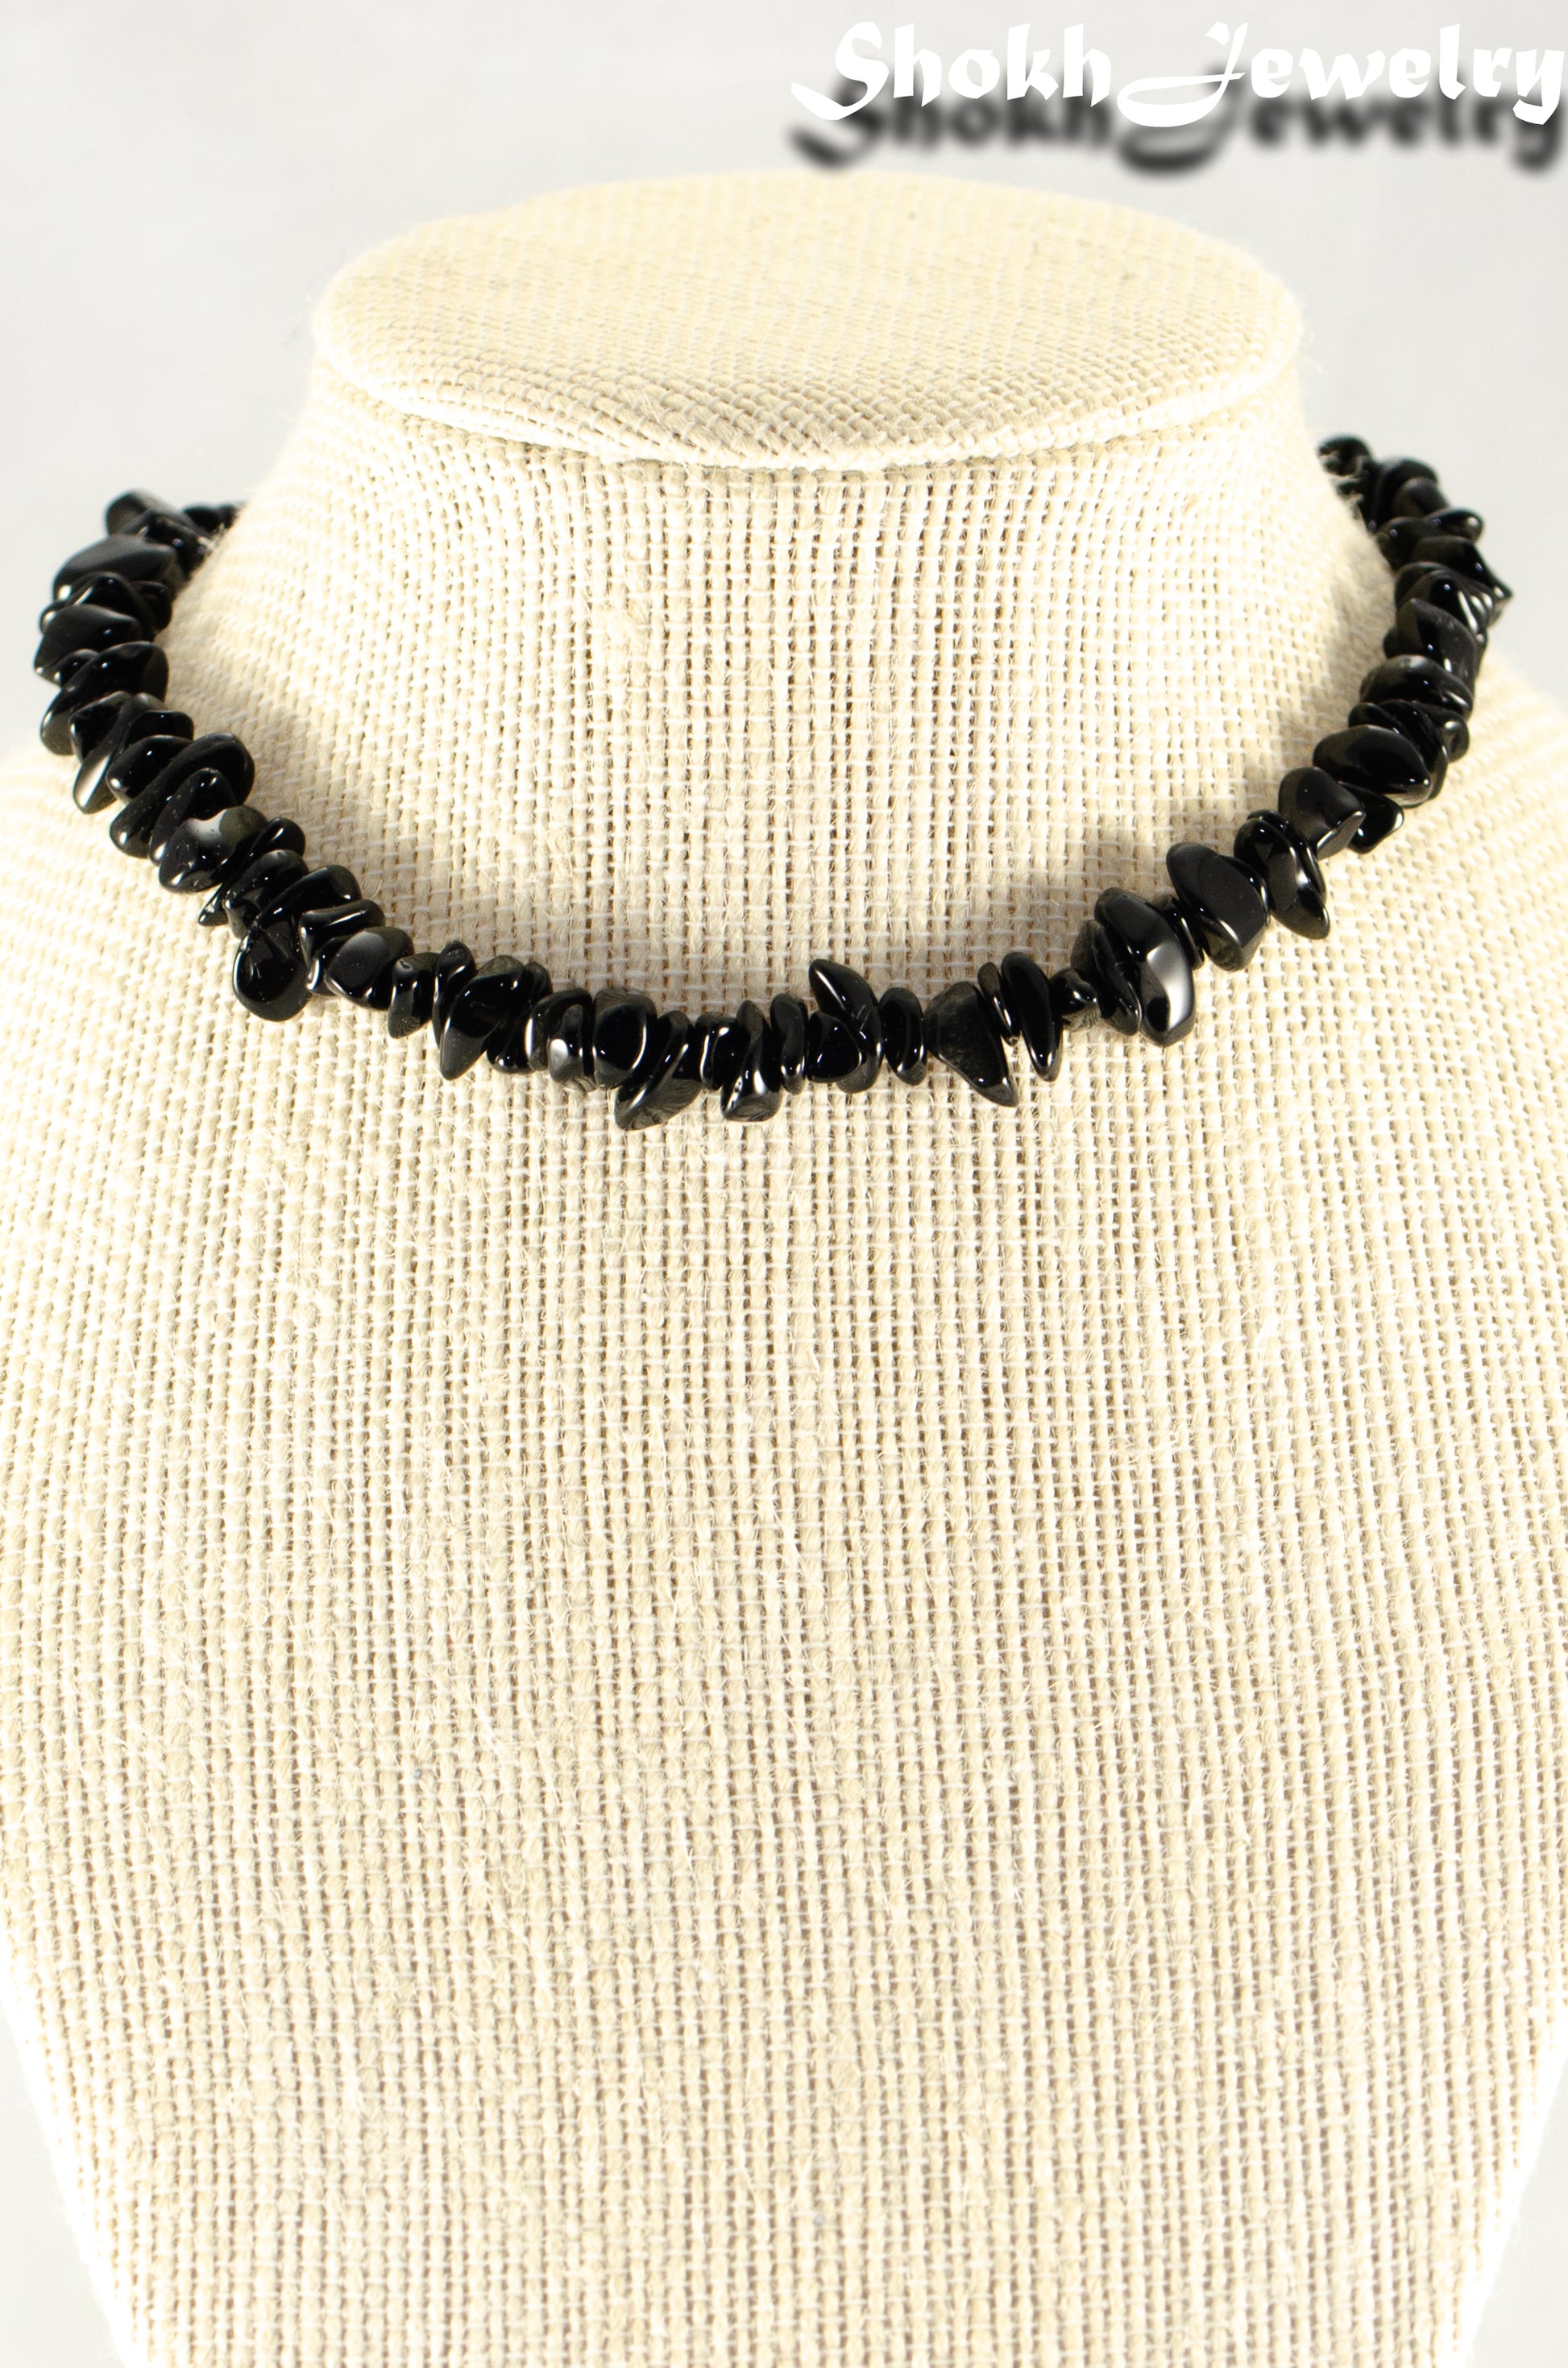 Close up of Natural Black Obsidian Crystal Chip Choker Necklace.